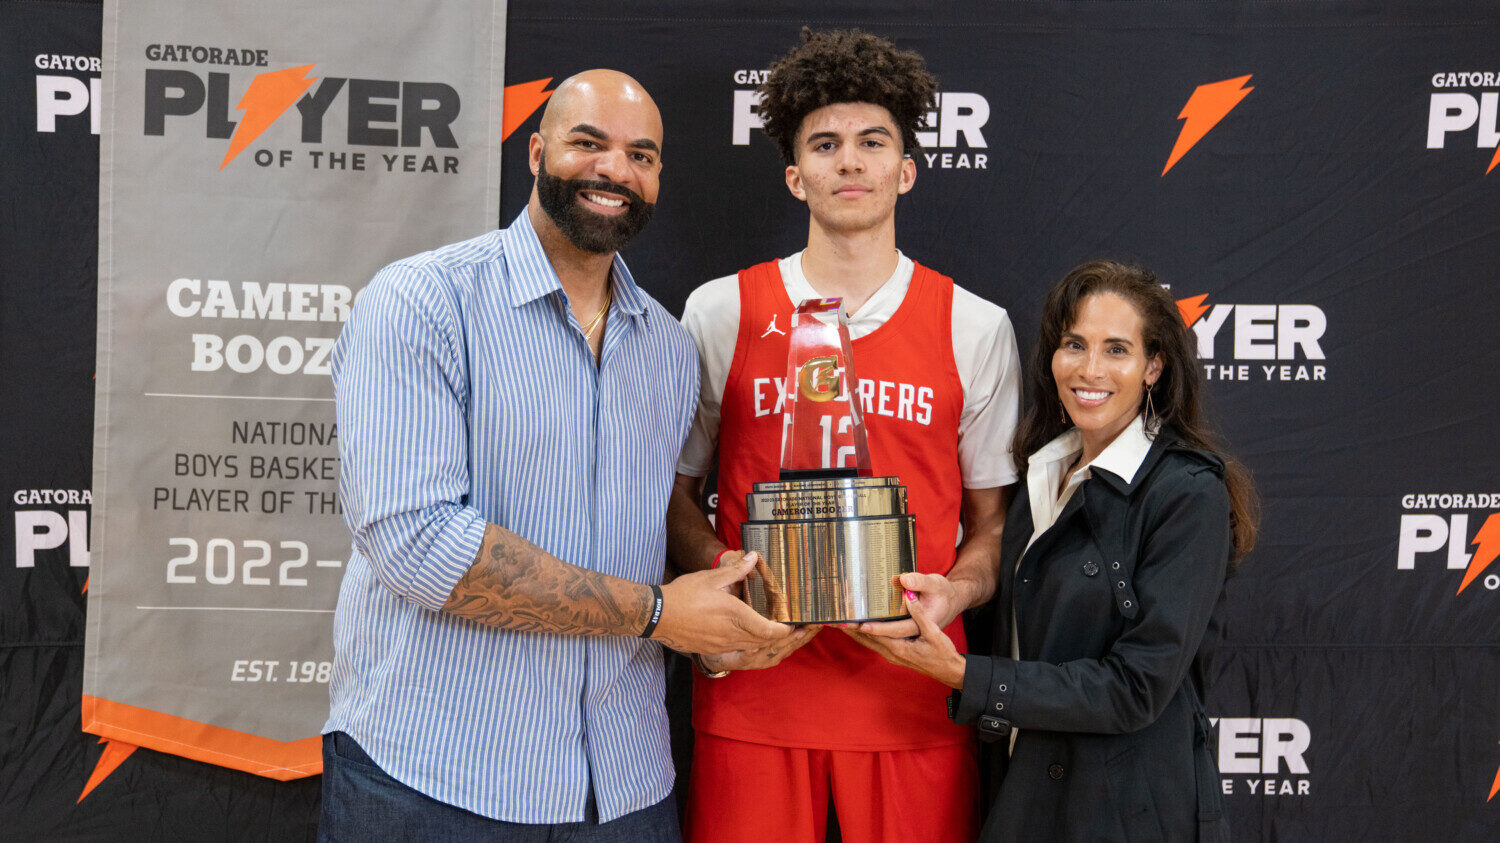 Son of Carlos Boozer Wins National Player of the Year Award, Sports-illustrated